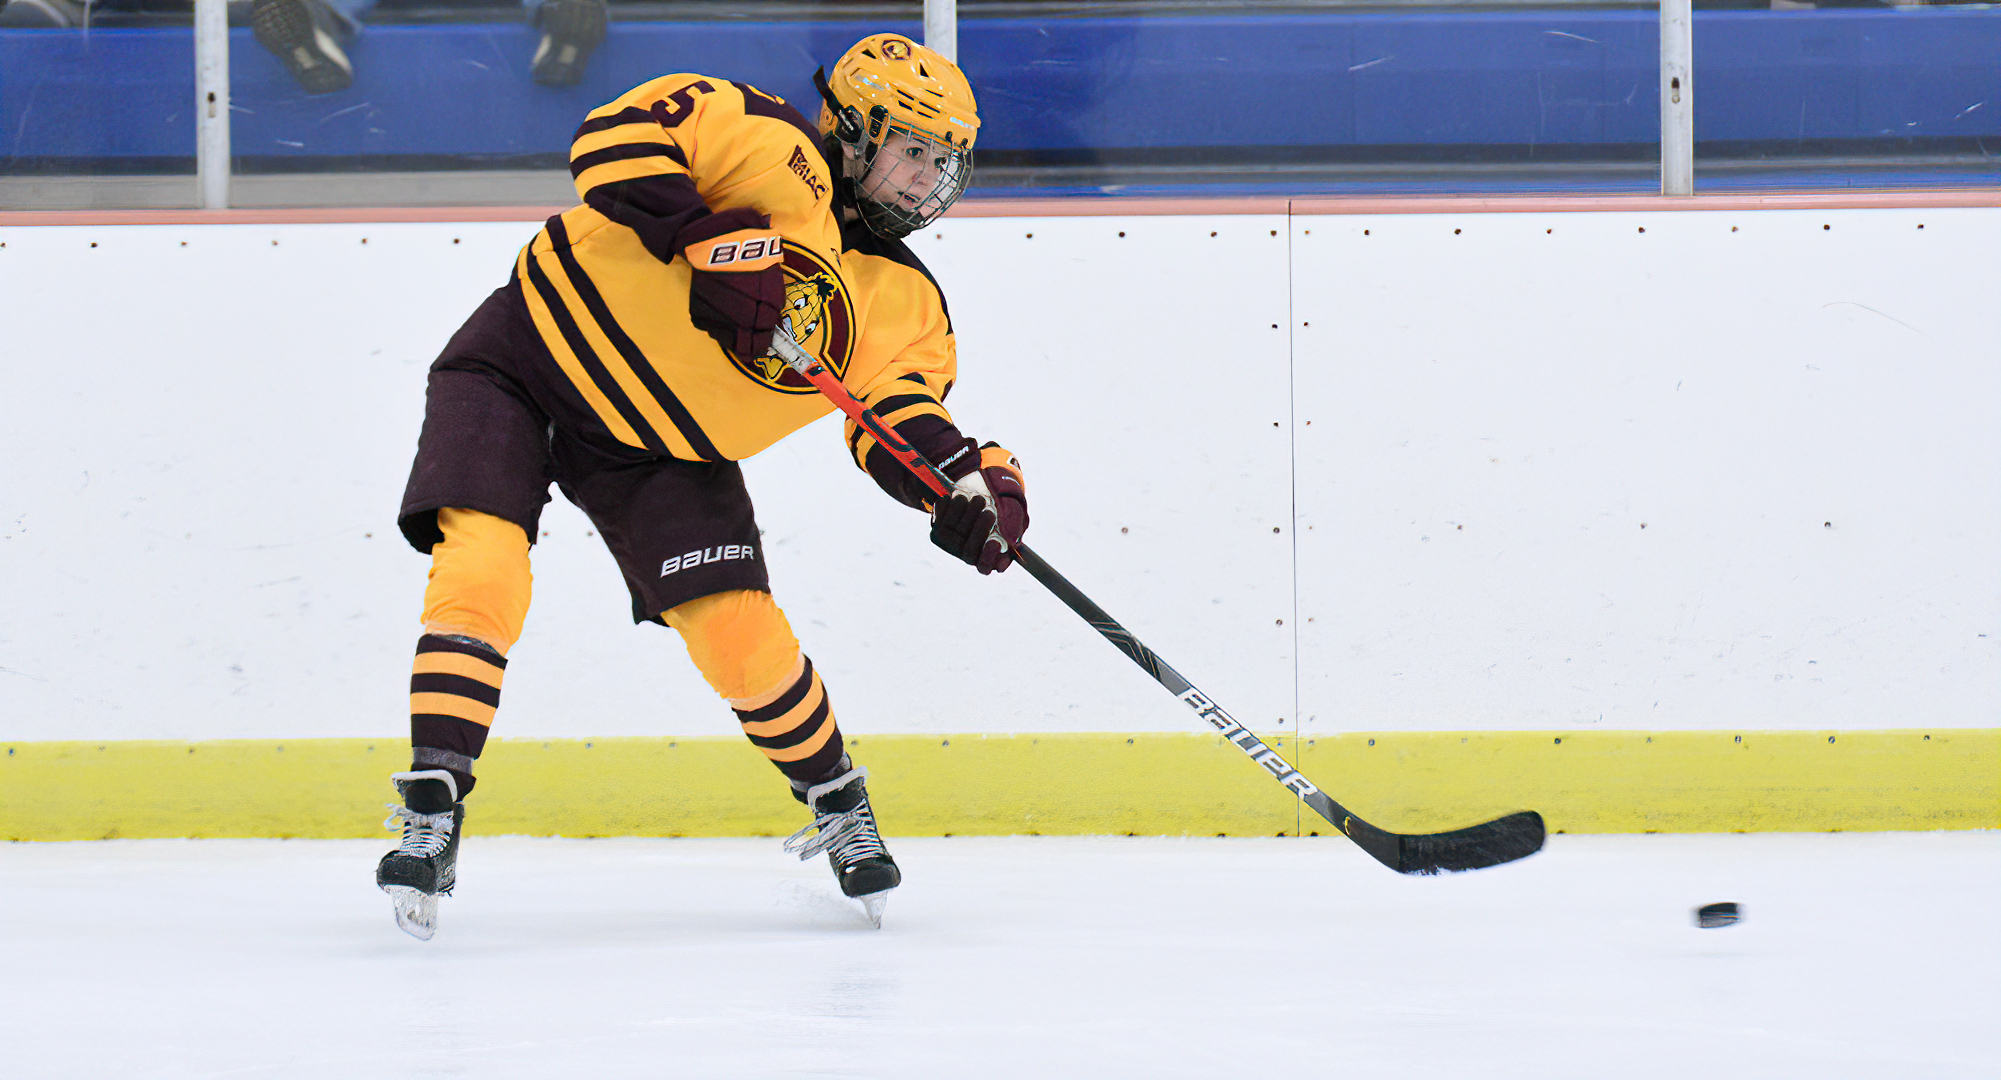 Junior McKenzie Oelkers scored the lone goal for the Cobbers' in the series finale game at St. Mary's.